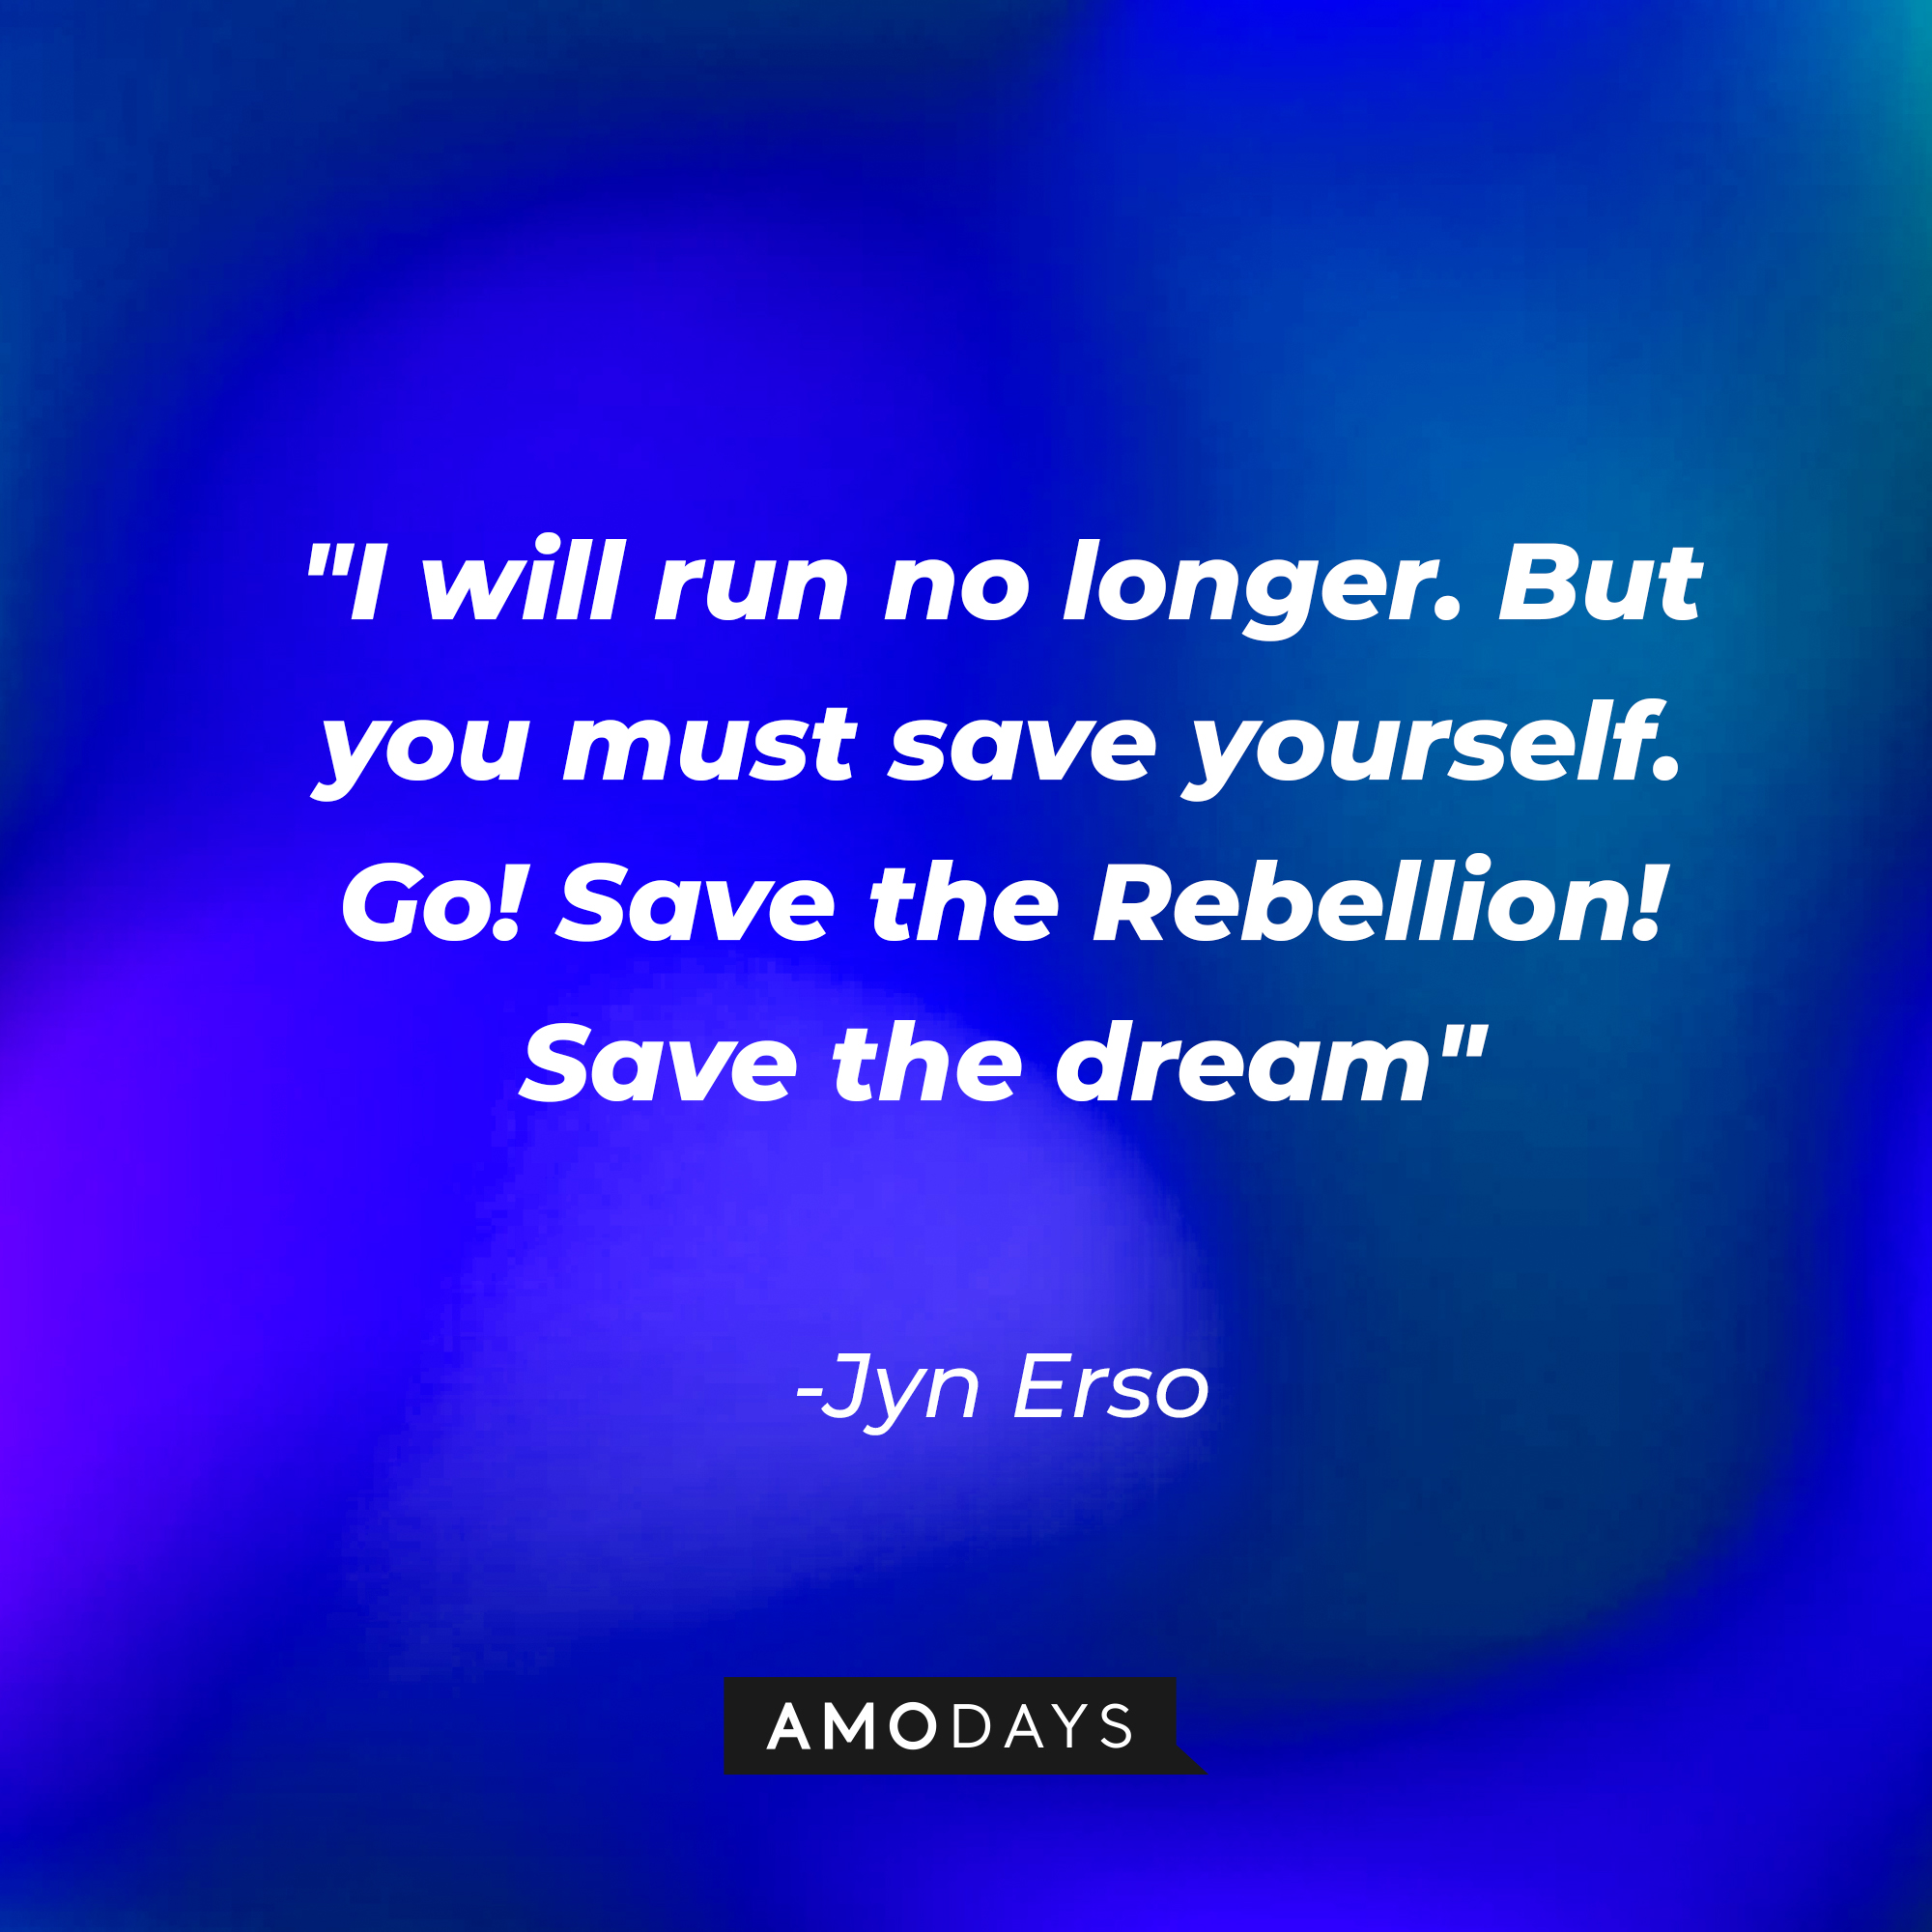 Jyn Erso's quote: "I will run no longer. But you must save yourself. Go! Save the Rebellion! Save the dream" | Source: Amodays